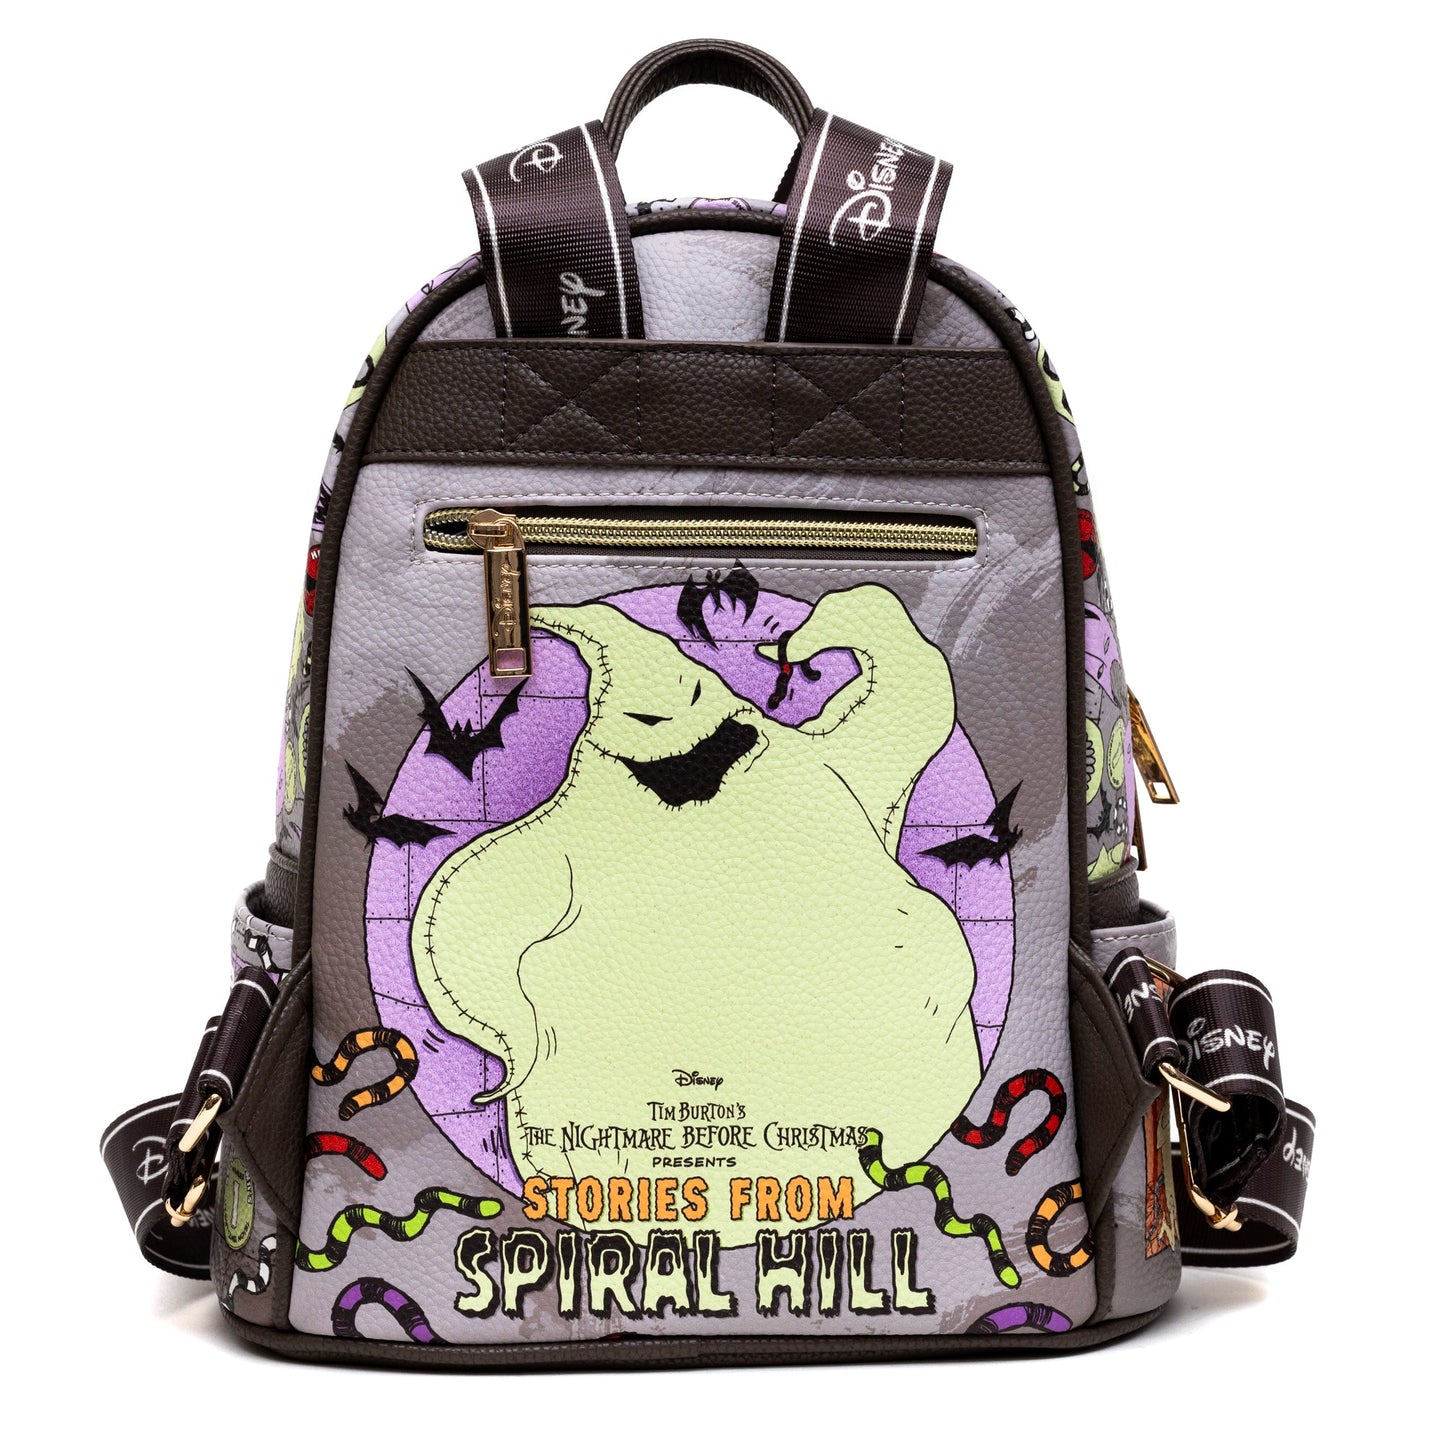 Exclusive Limited Edition-NBC Oogie Boogie Vegan Leather Backpack